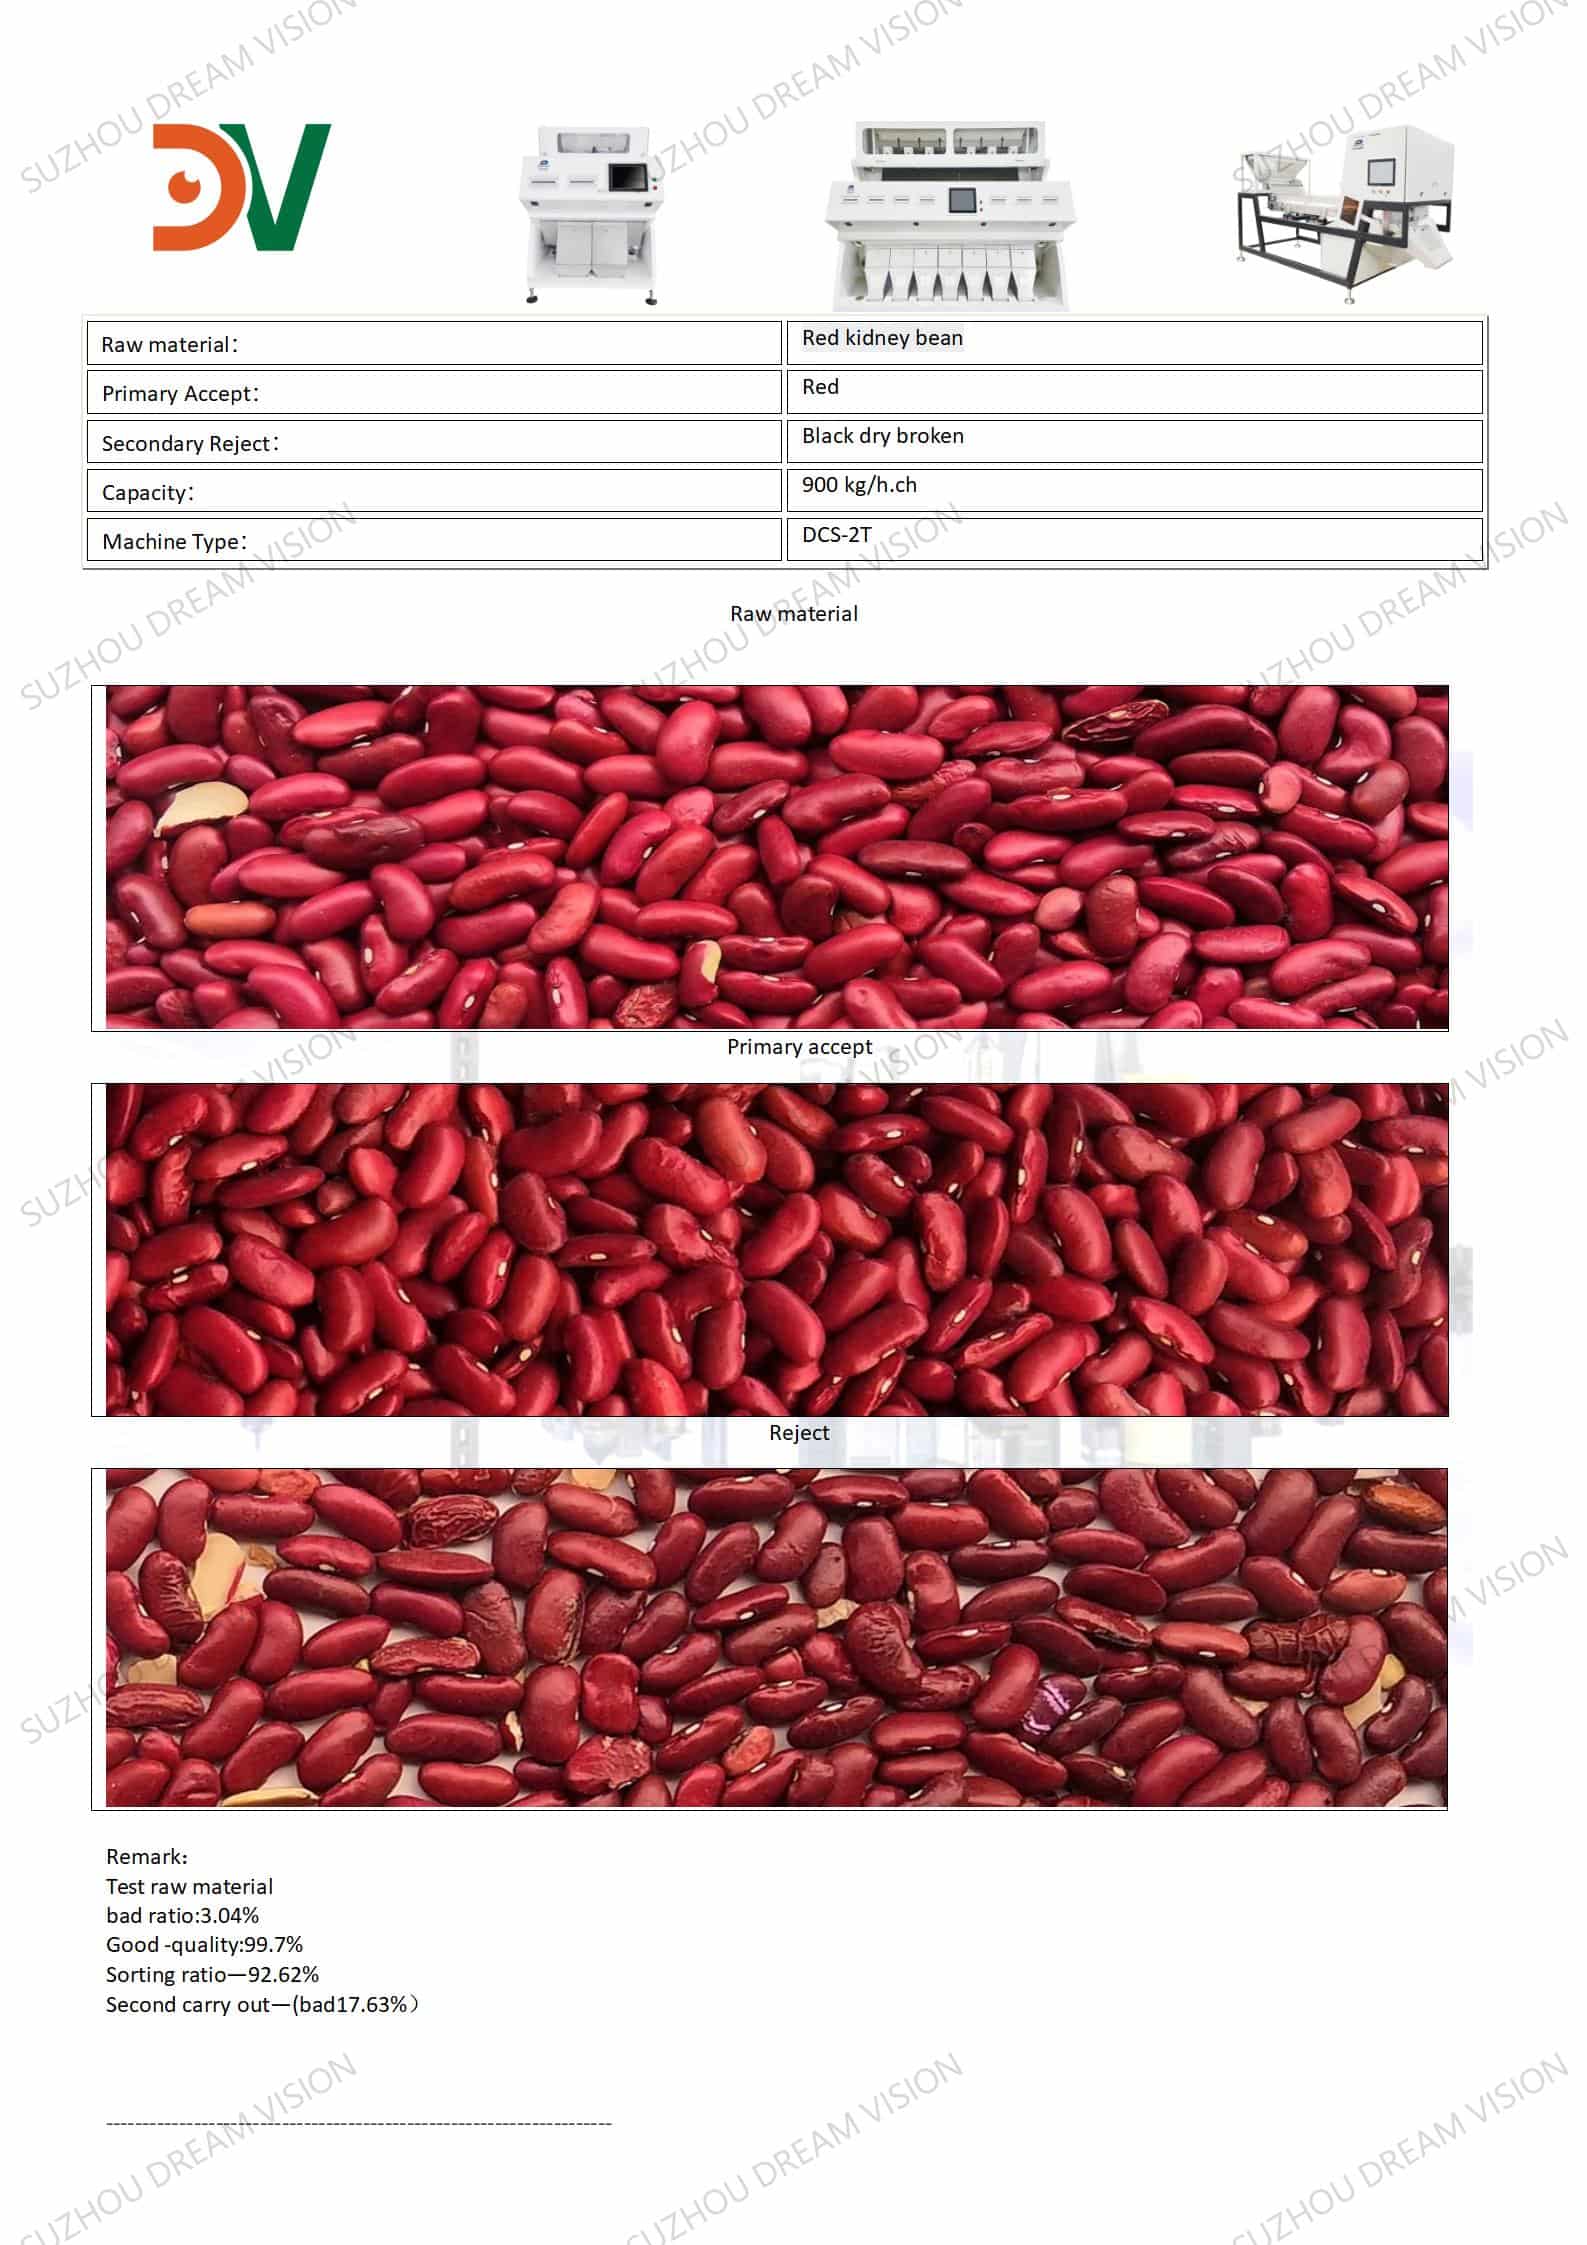 Red Kidney Beans Color Sorting Test Report